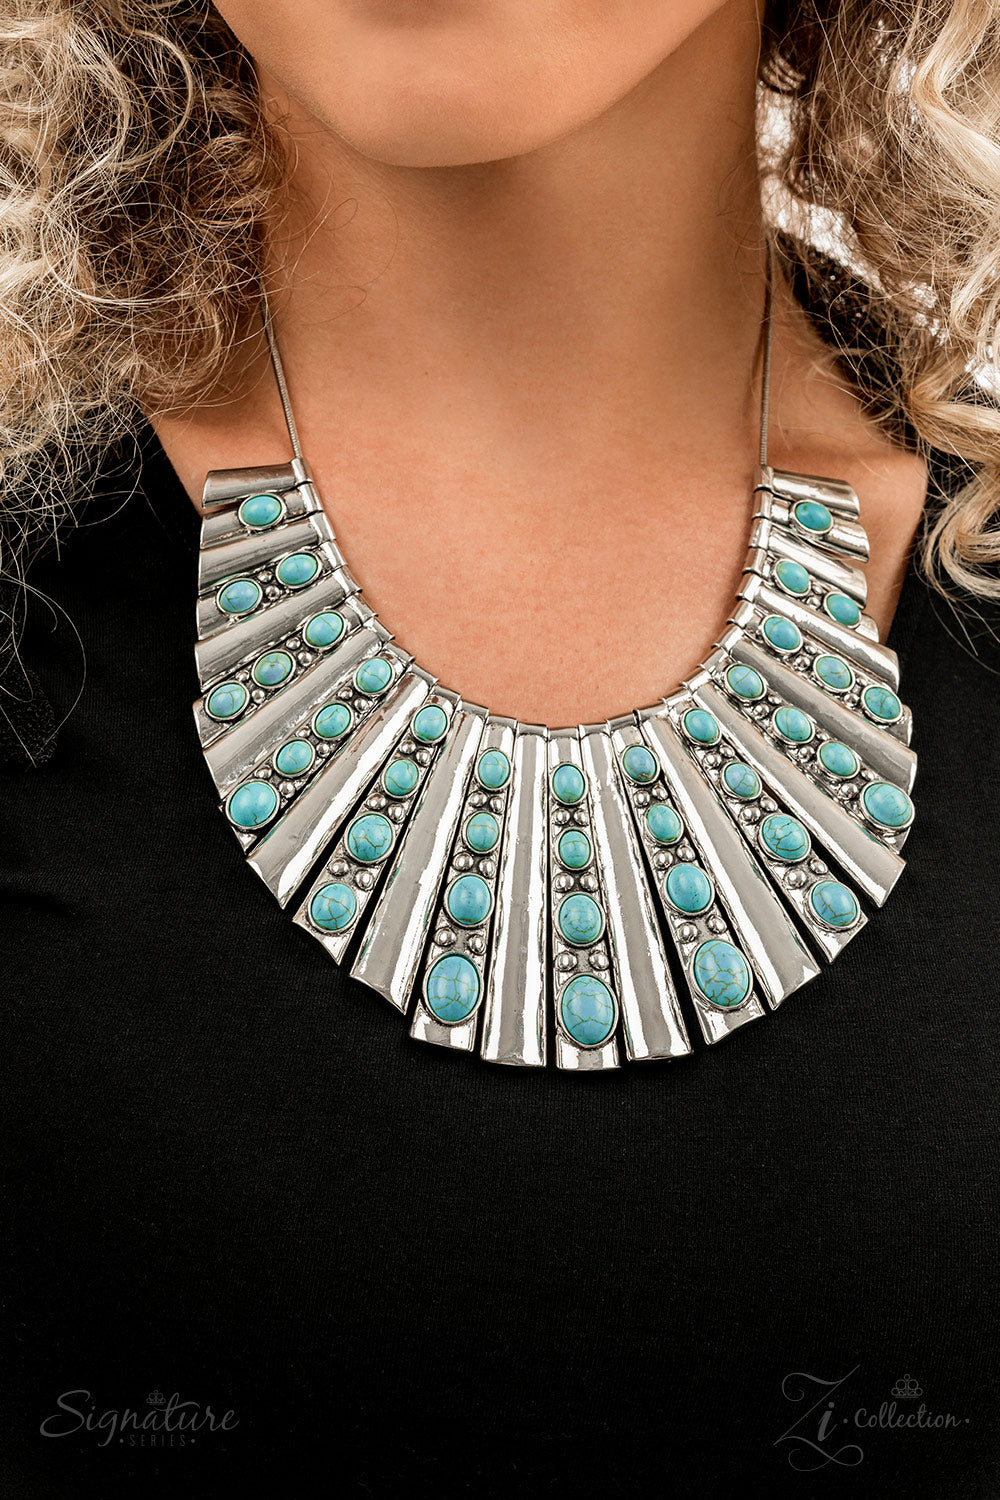 Paparazzi Accessories The Ebony Elongated silver plates featuring a high sheen finish fan out unapologetically along the collar, graduating in size as they lead down to the center. Oval-shaped turquoise stones, nestled in raised silver borders, adorn ever